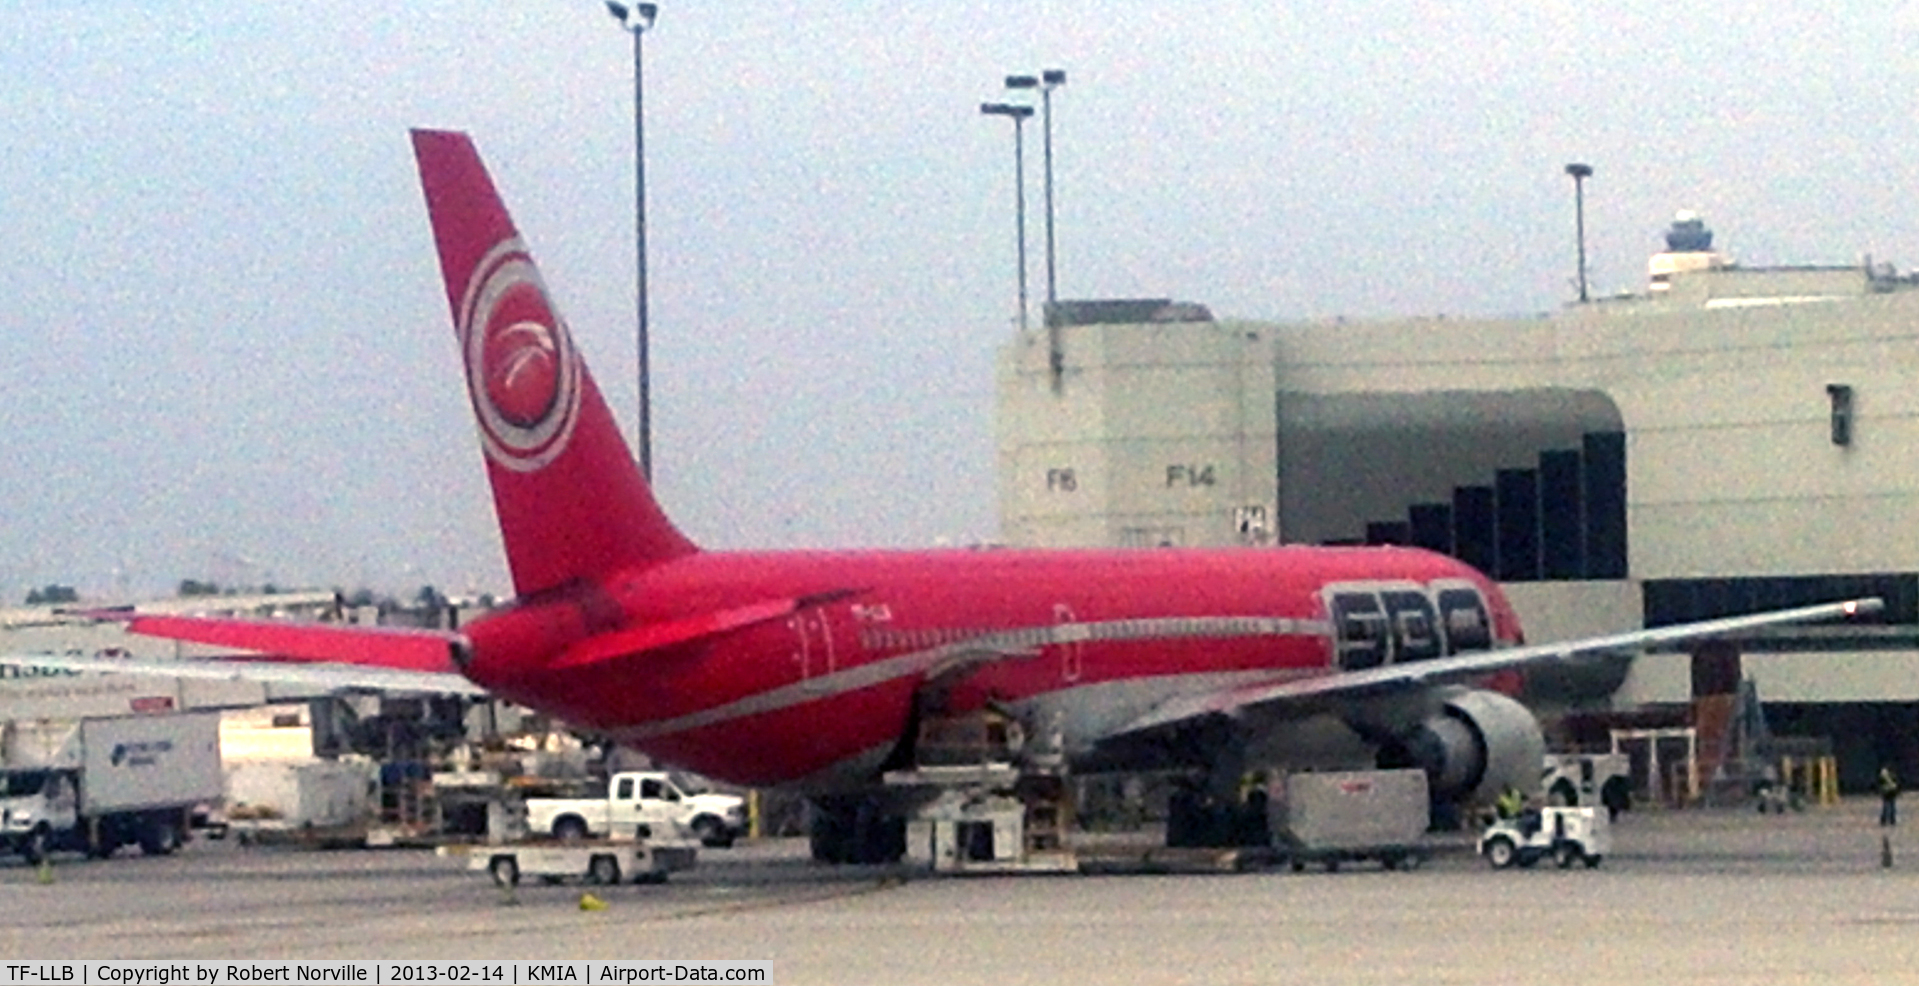 TF-LLB, 1991 Boeing 767-3Y0/ER C/N 25000, At the gate - Miami

Photo with the permission of Robert Norville